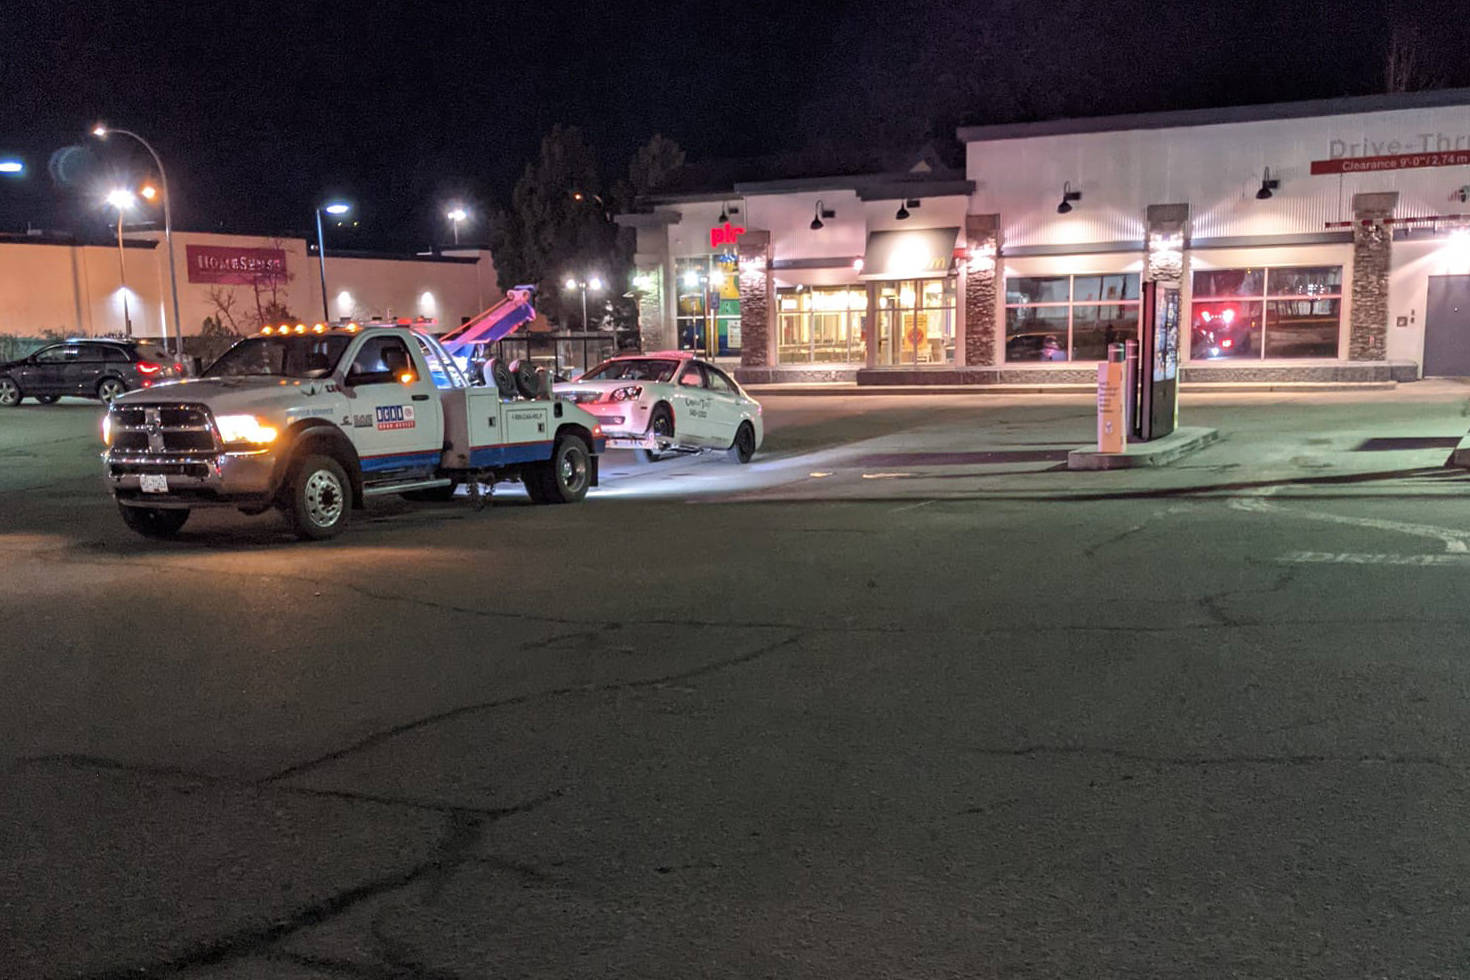 An off-duty Vernon Taxi driver got a 24-hour licence suspension, vehicle towed, after failing a standardized field sobriety test around 1:40 a.m. Tuesday, March 2, 2021. (John E Green - Facebook)